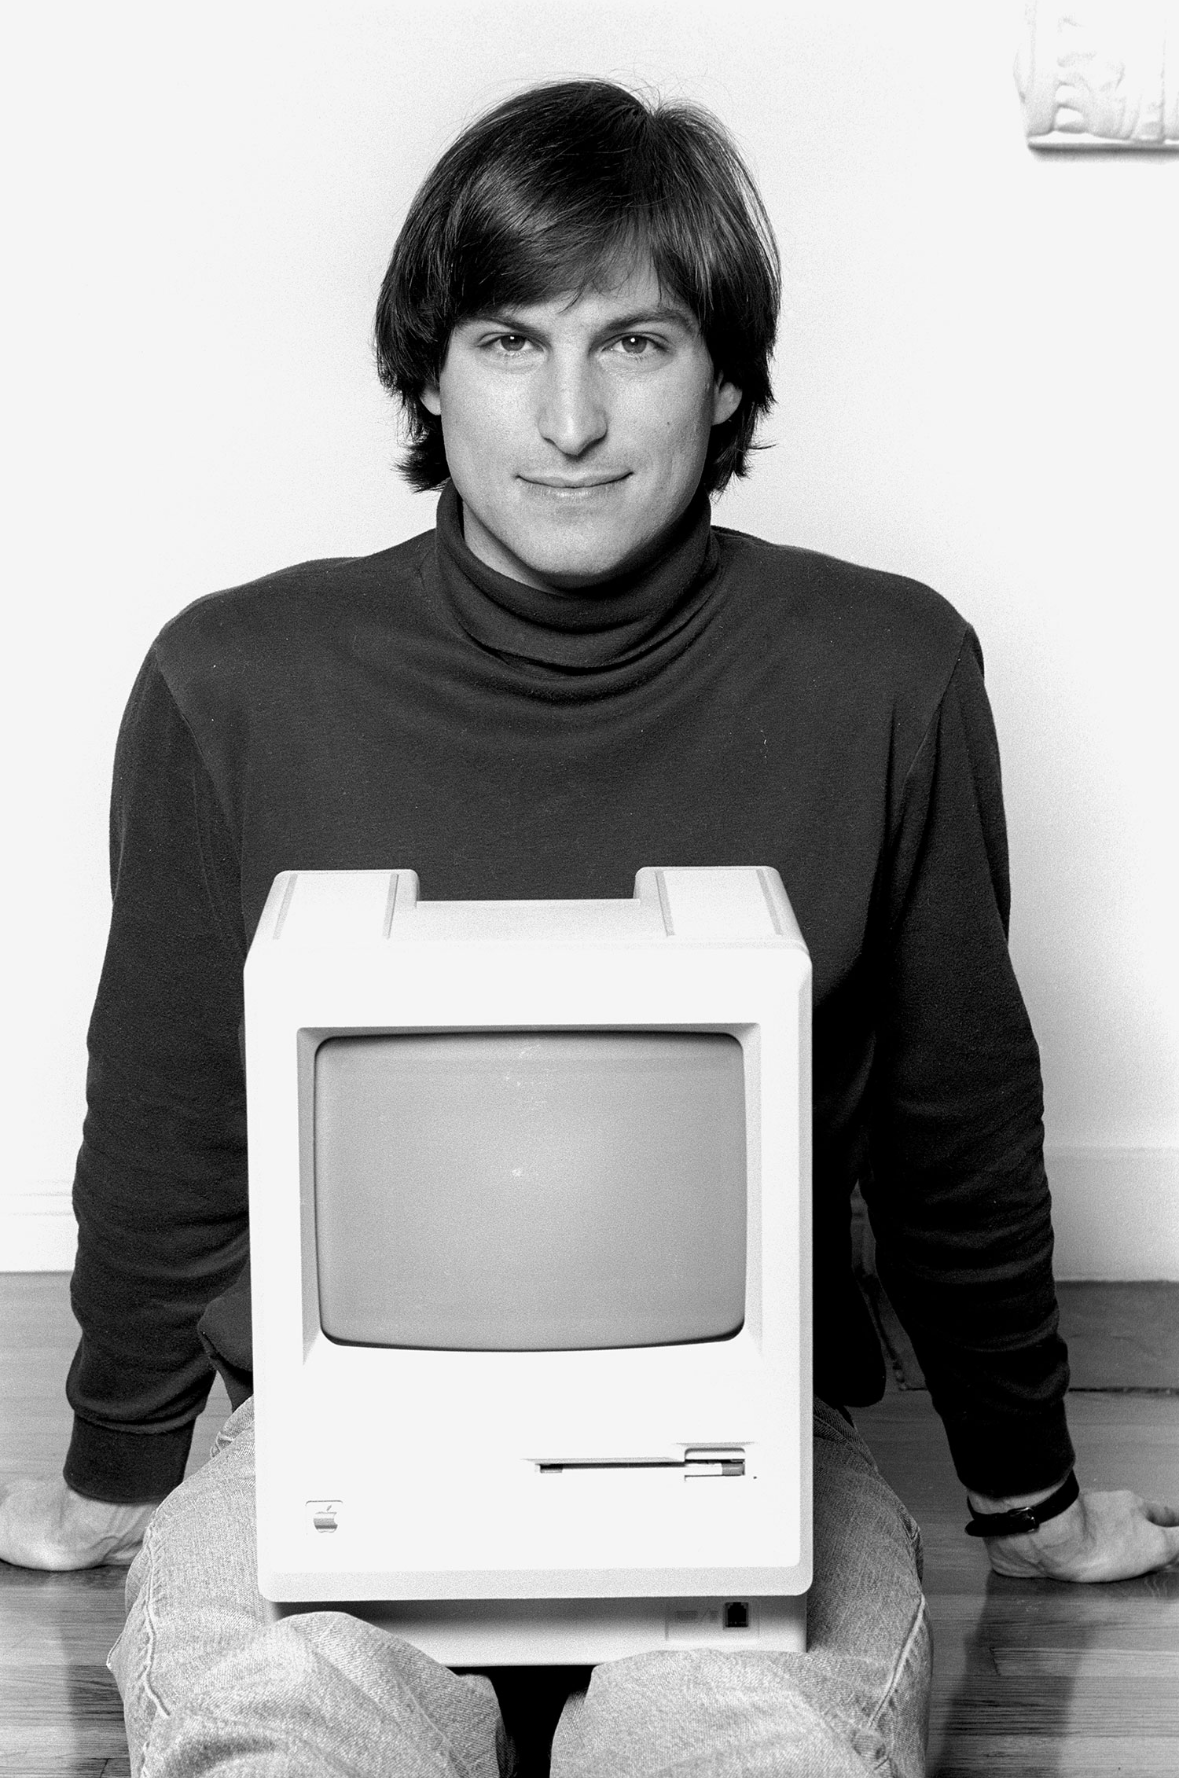 Steve Jobs with his computer